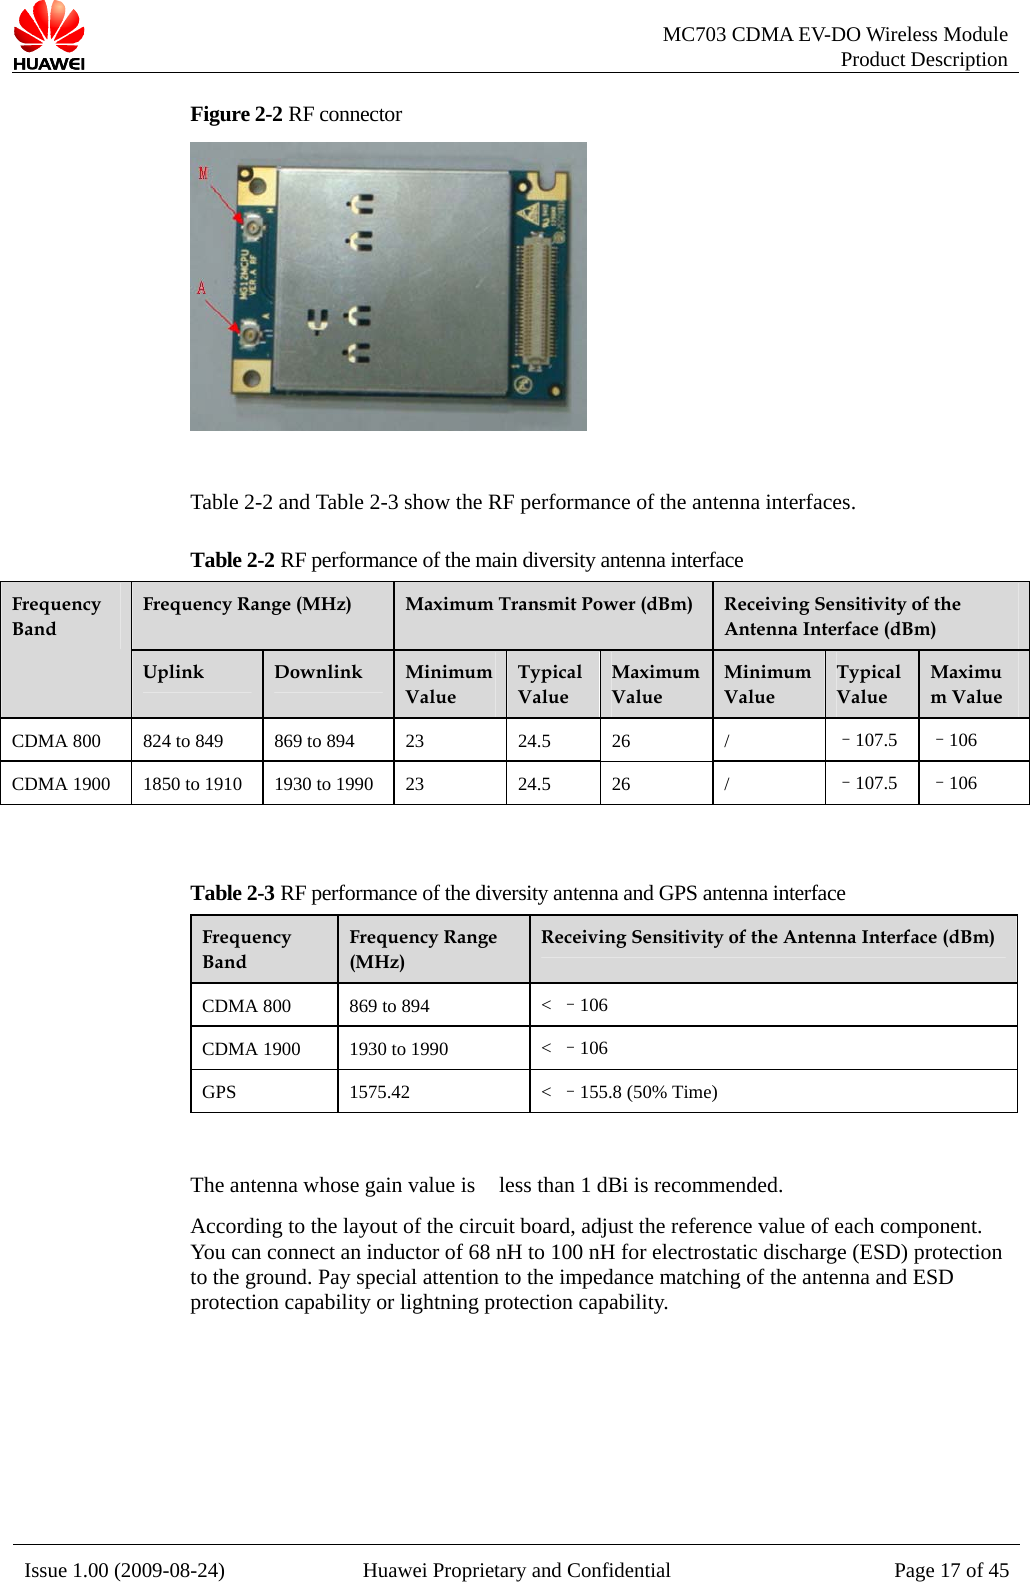   MC703 CDMA EV-DO Wireless Module Product Description Issue 1.00 (2009-08-24)  Huawei Proprietary and Confidential Page 17 of 45Figure 2-2 RF connector   Table 2-2 and Table 2-3 show the RF performance of the antenna interfaces. Table 2-2 RF performance of the main diversity antenna interface Frequency Range (MHz)  Maximum Transmit Power (dBm)  Receiving Sensitivity of the Antenna Interface (dBm) Frequency Band Uplink  Downlink  Minimum Value Typical Value Maximum Value Minimum Value Typical Value Maximum Value CDMA 800  824 to 849  869 to 894  23  24.5  26  /  –107.5  –106 CDMA 1900  1850 to 1910  1930 to 1990  23  24.5  26  /  –107.5  –106  Table 2-3 RF performance of the diversity antenna and GPS antenna interface Frequency Band Frequency Range (MHz) Receiving Sensitivity of the Antenna Interface (dBm) CDMA 800  869 to 894  &lt;  –106 CDMA 1900  1930 to 1990  &lt;  –106 GPS 1575.42  &lt;  –155.8 (50% Time)  The antenna whose gain value is less than 1 dBi is recommended. According to the layout of the circuit board, adjust the reference value of each component. You can connect an inductor of 68 nH to 100 nH for electrostatic discharge (ESD) protection to the ground. Pay special attention to the impedance matching of the antenna and ESD protection capability or lightning protection capability.  